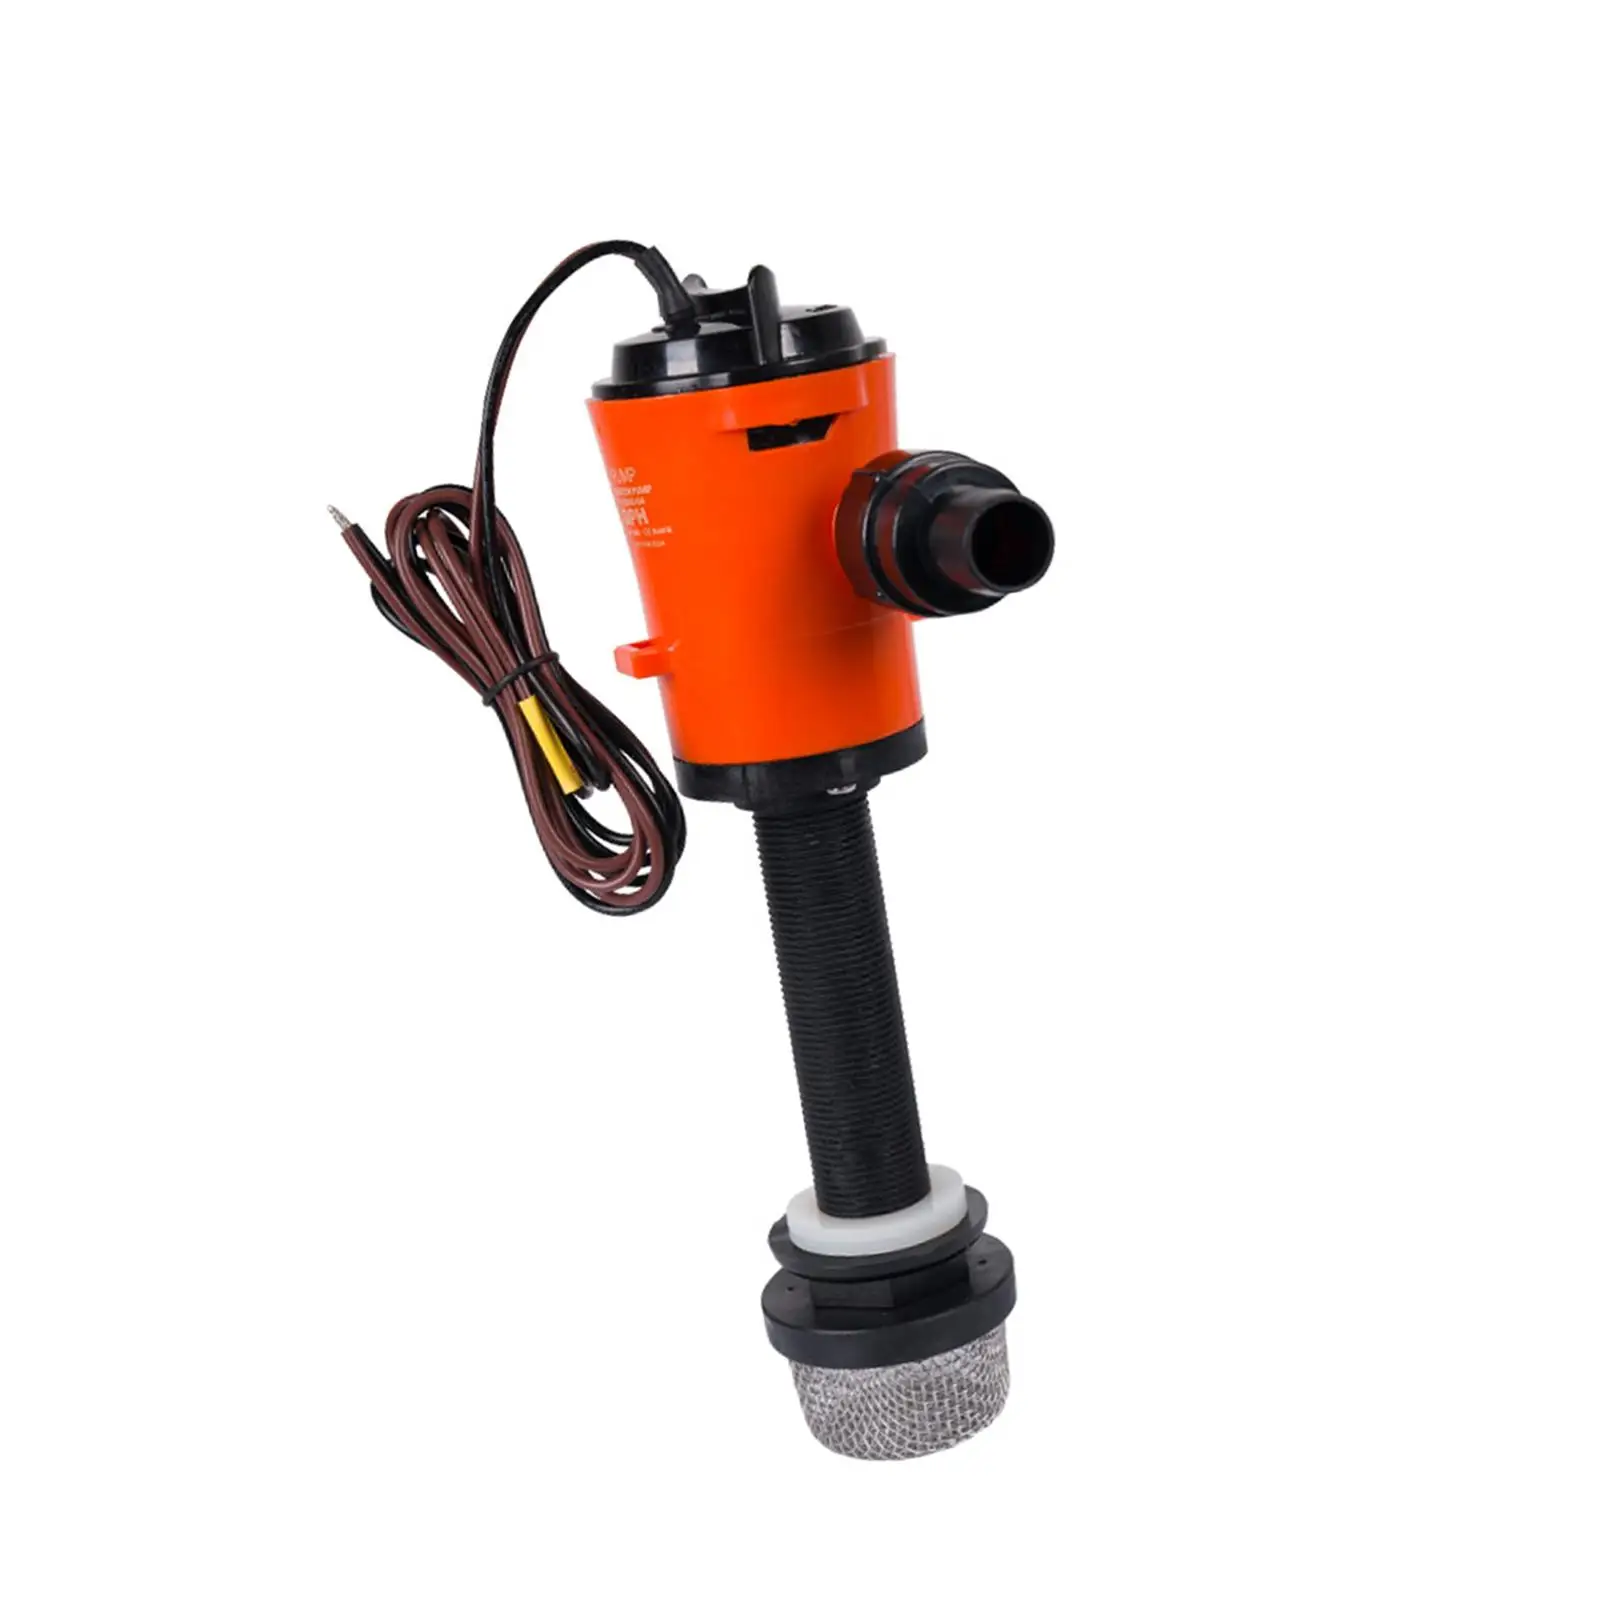 Livewell Pump Replaces Submersible Assembly Easy to Clean Durable Professional with Filter Accessories Boat Aerator Pump